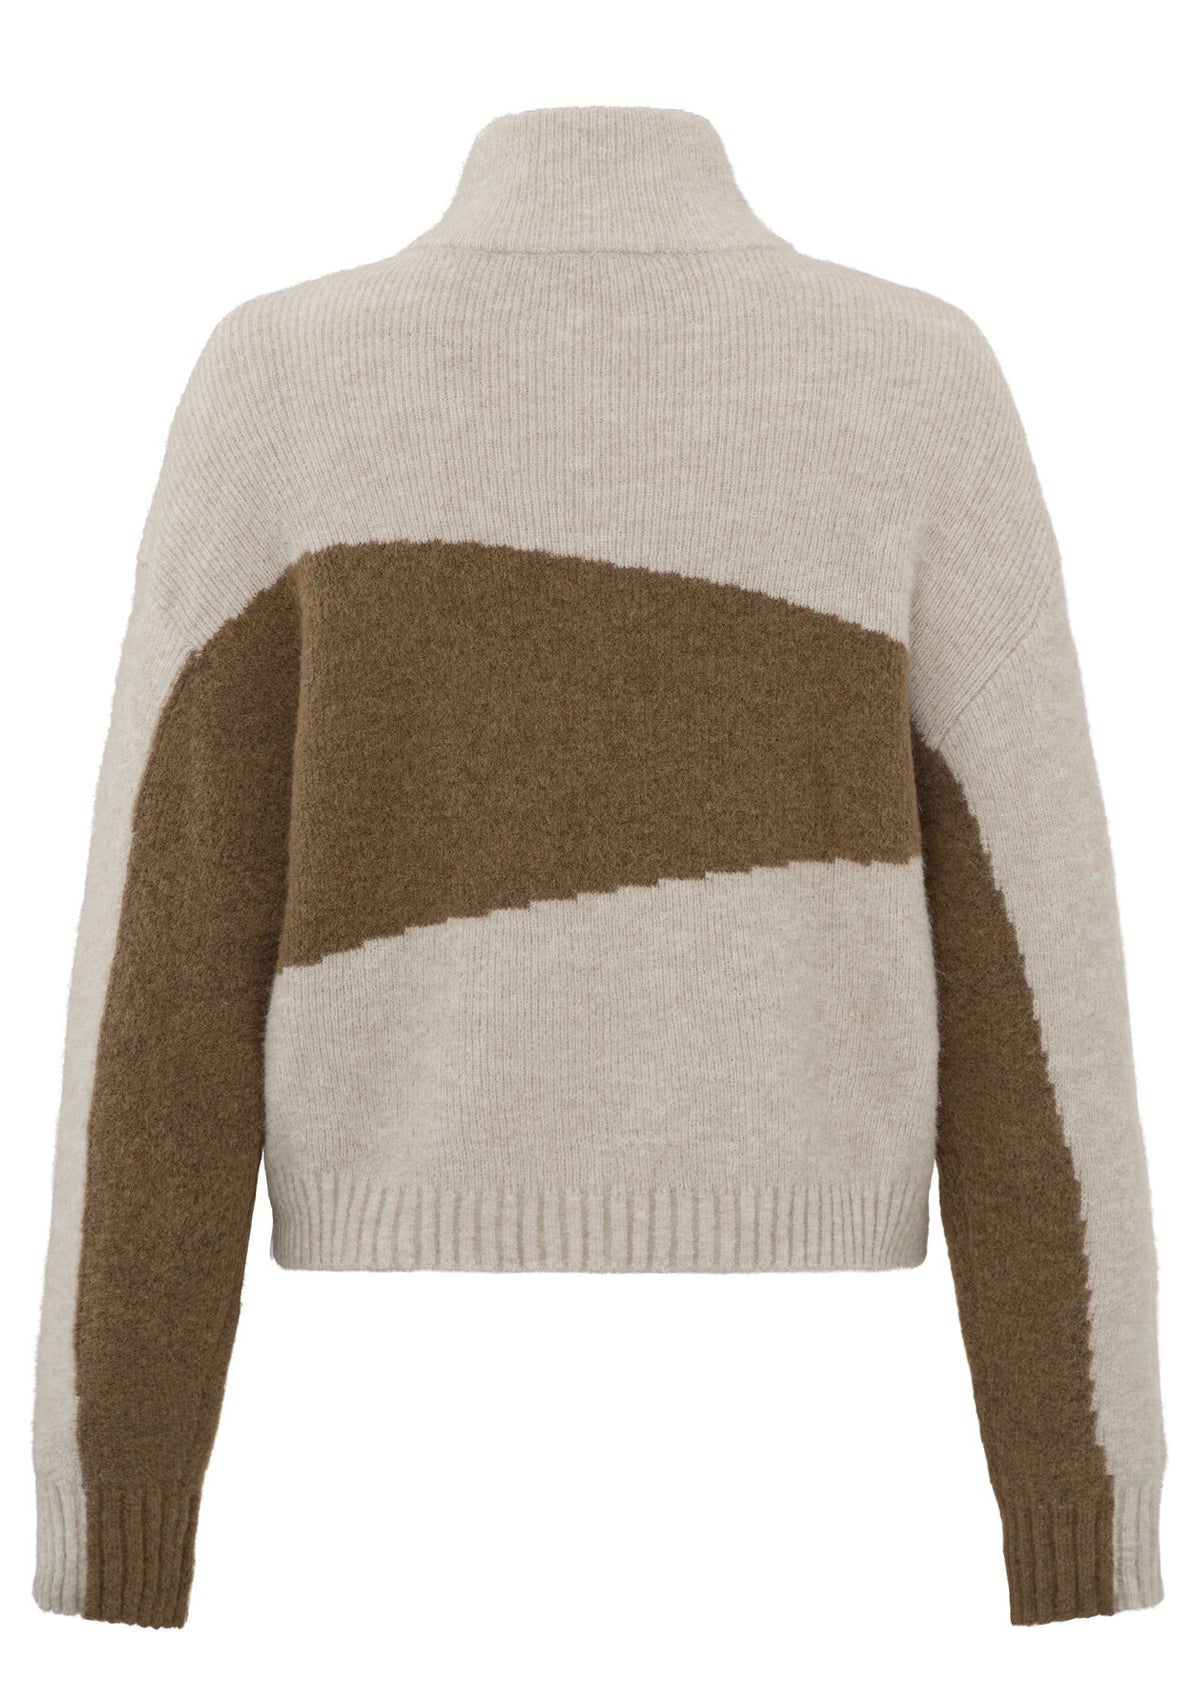 YAYA Sweater With Zip Neck, Long Sleeves And Rib Details Beige